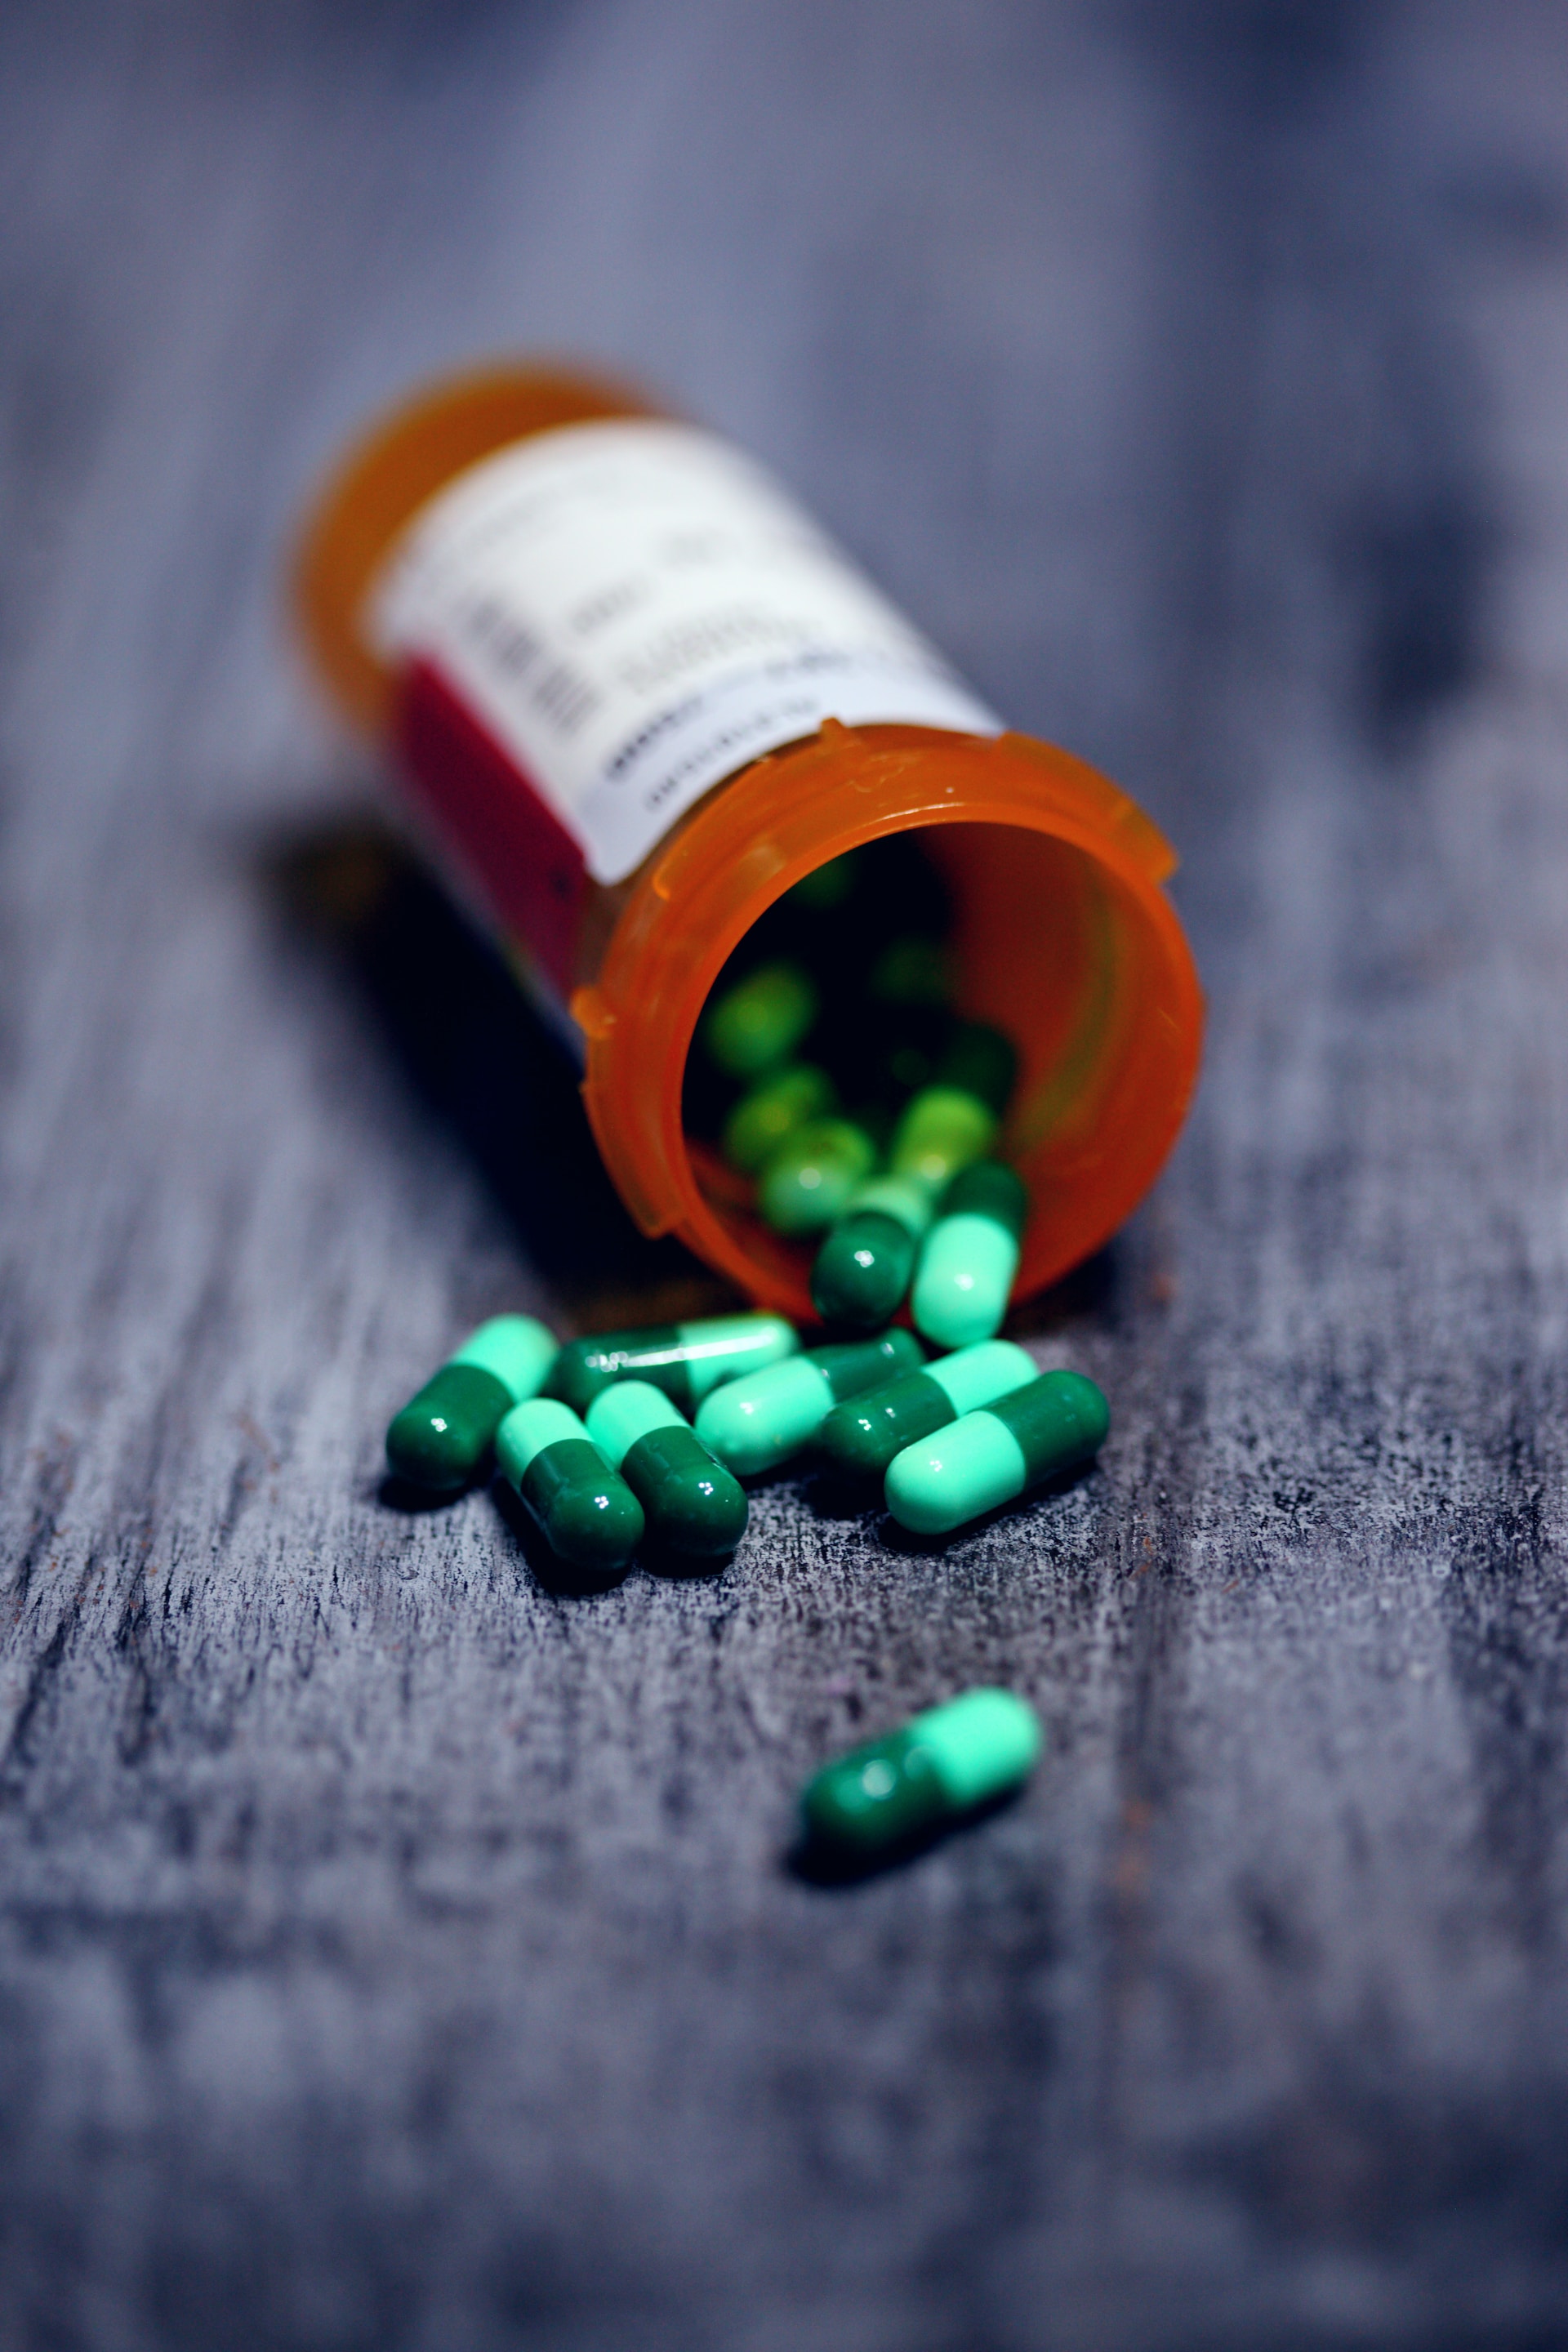 A pill bottle spills out green capsules on a grey carpet.